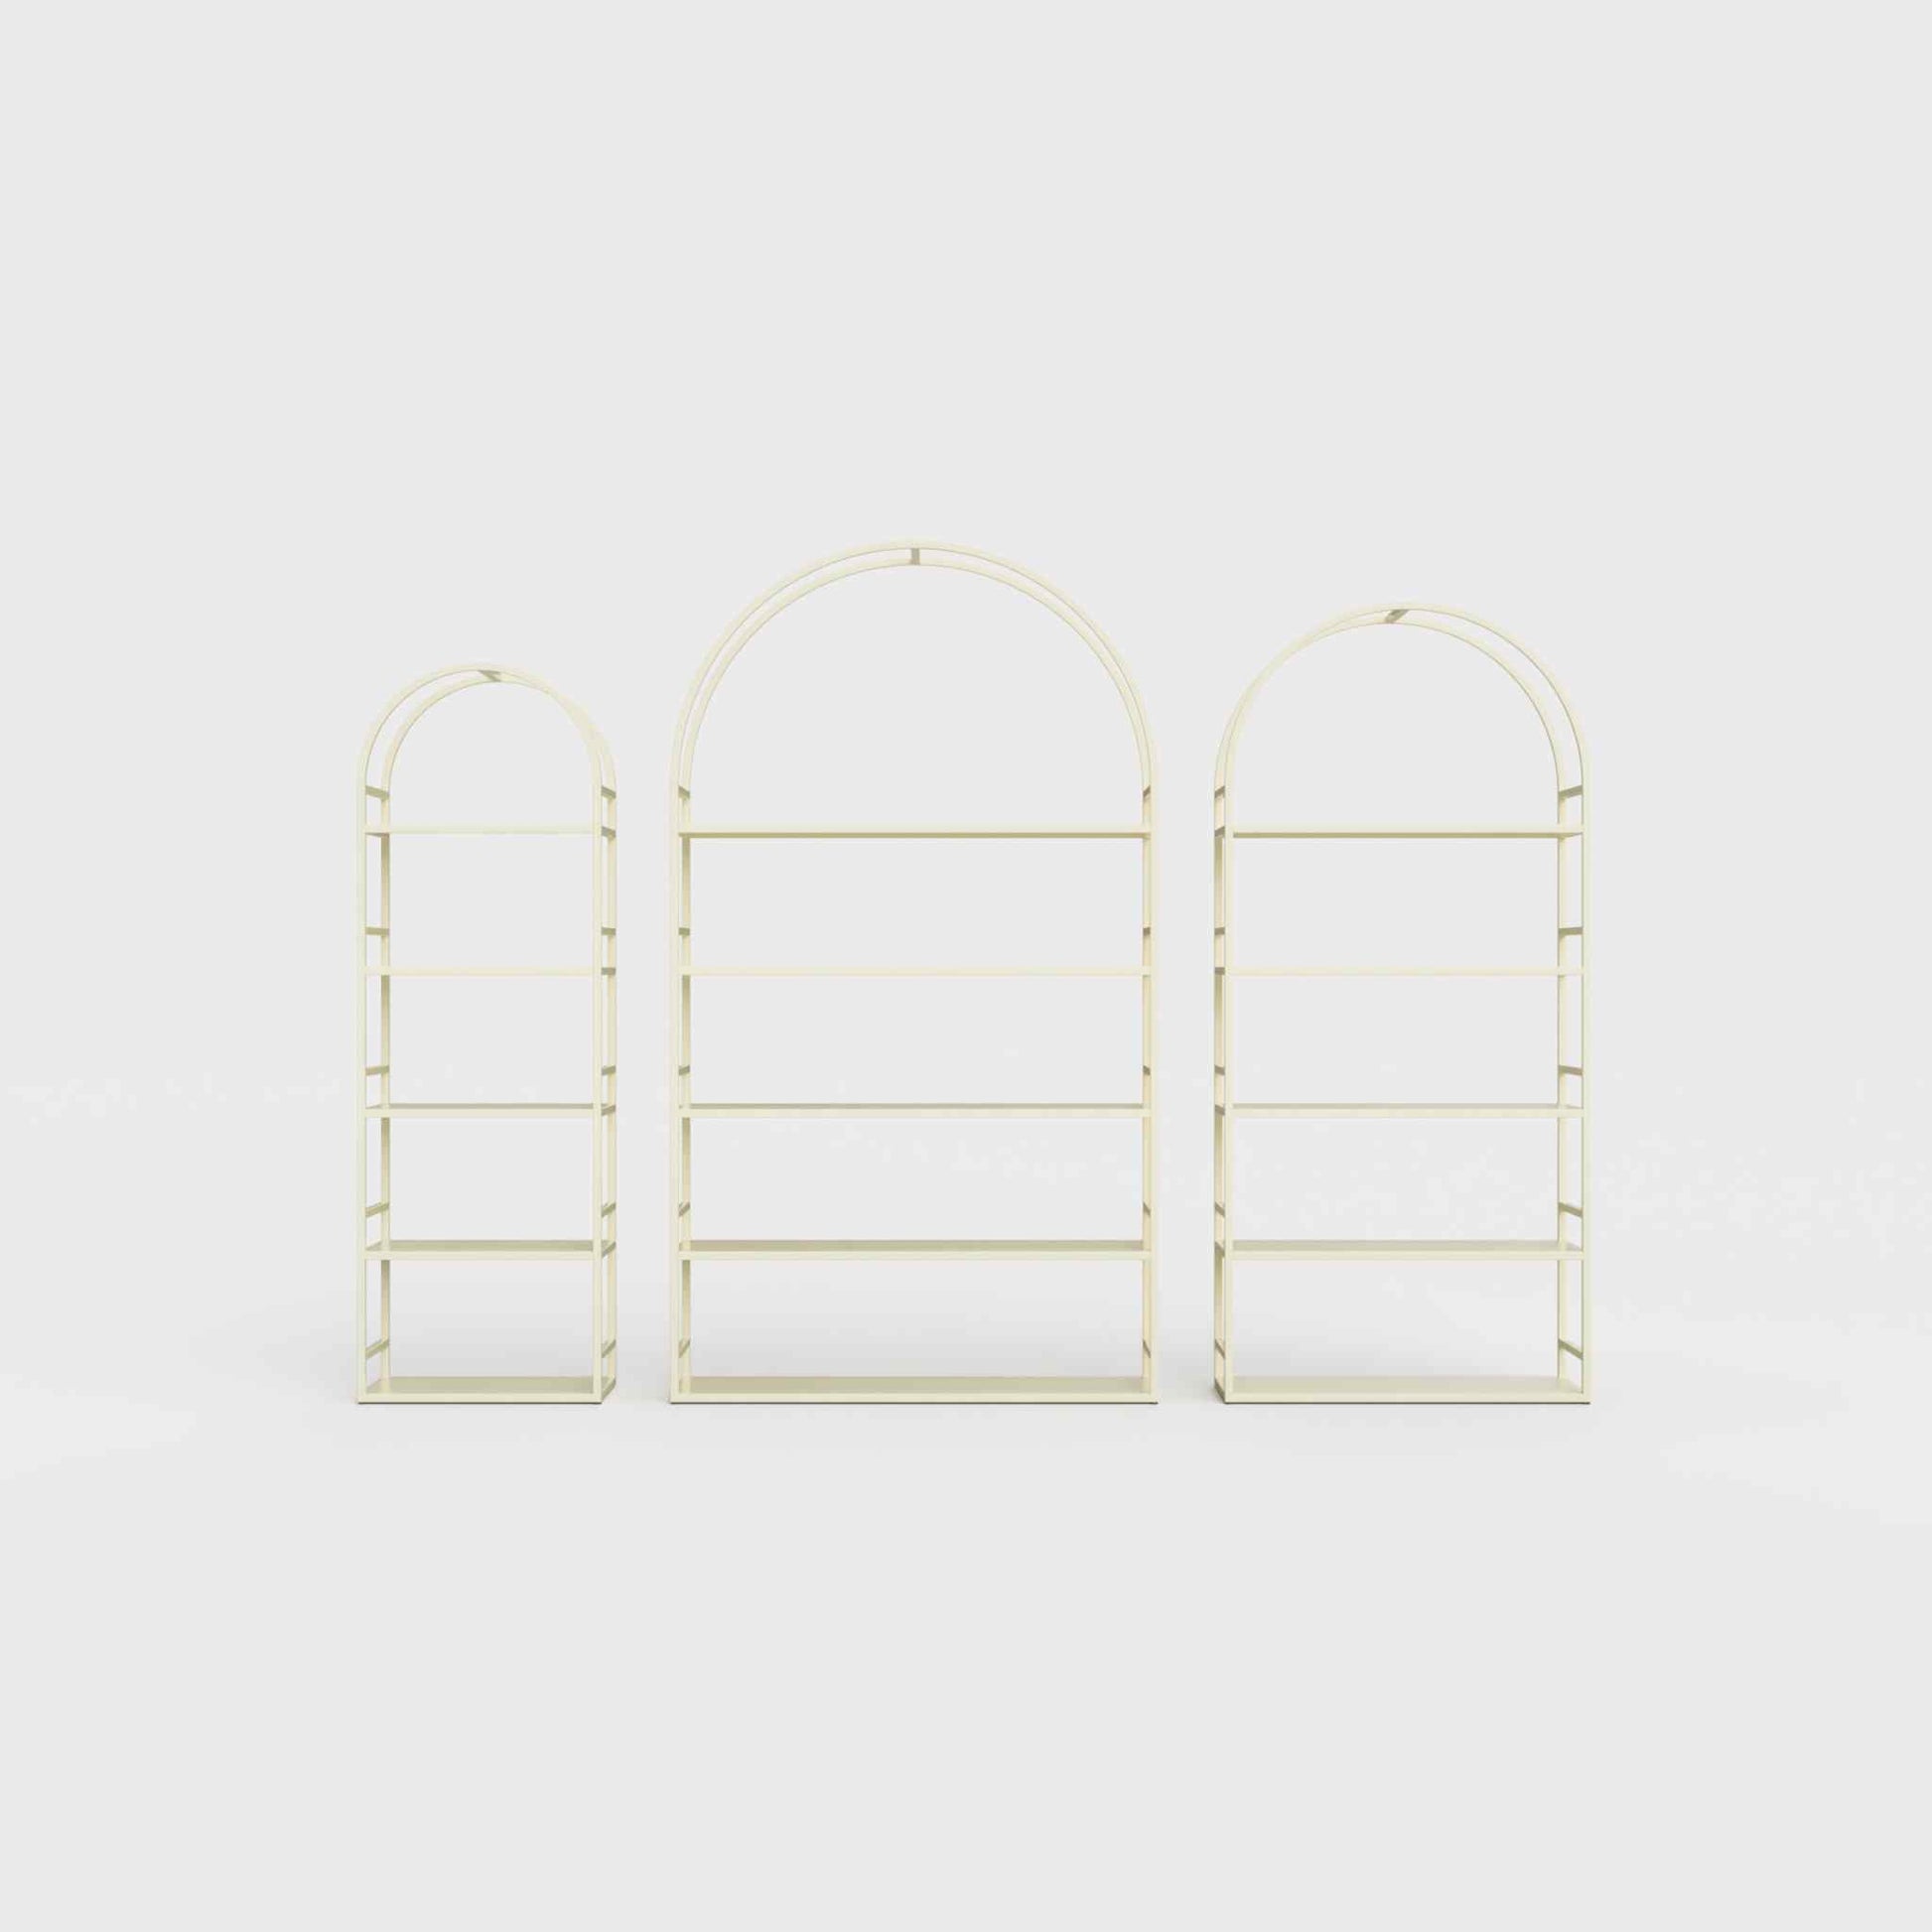 Arched bookcase Arkada, available in Switzerland through ÉTAUDORÉ, made from highest quality powdered coated steel in light ecru